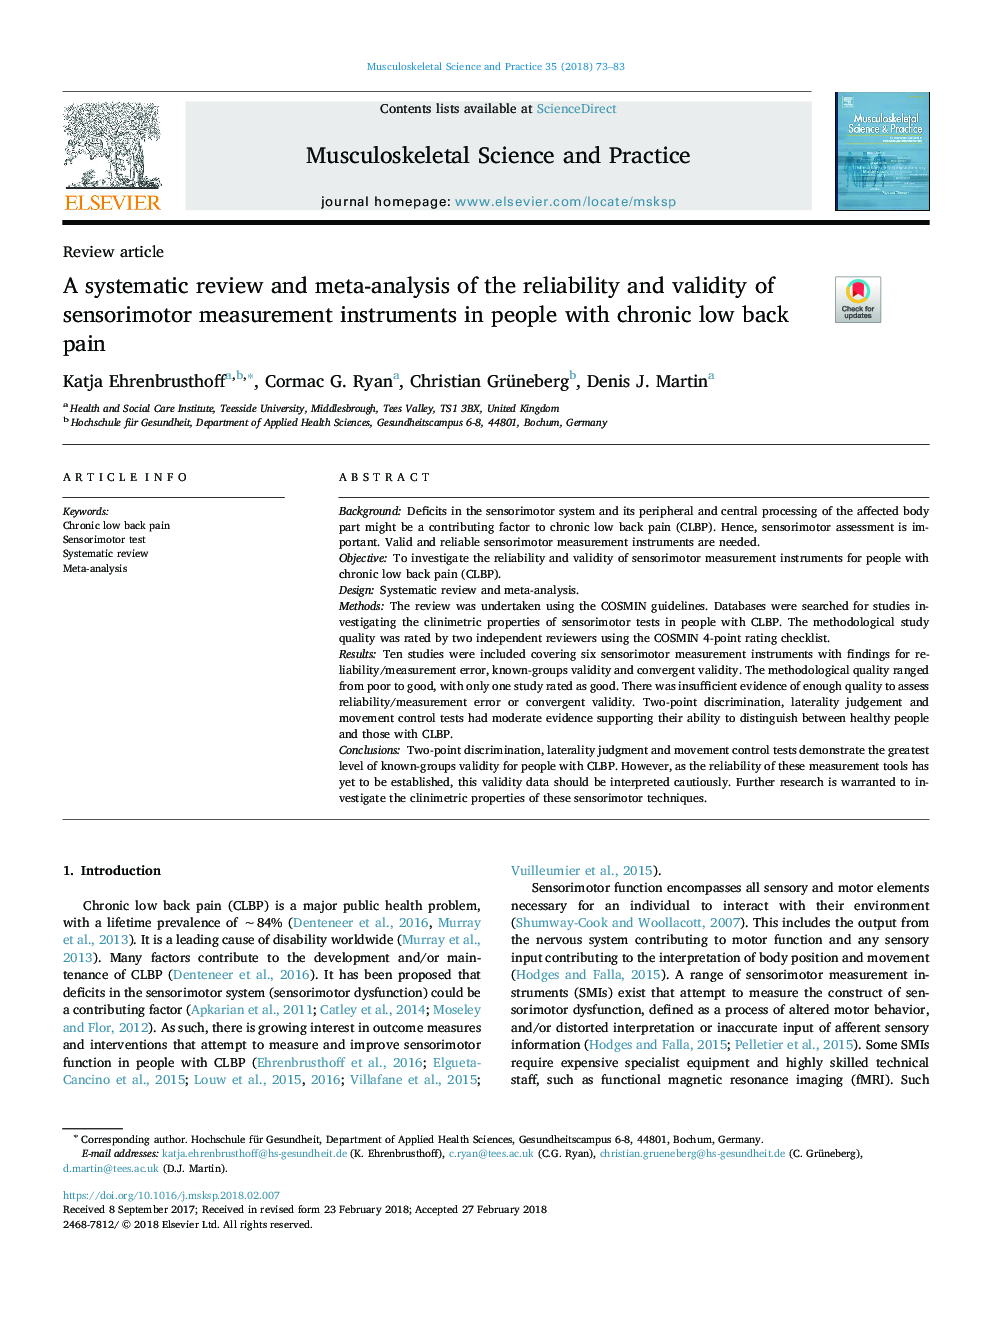 A systematic review and meta-analysis of the reliability and validity of sensorimotor measurement instruments in people with chronic low back pain